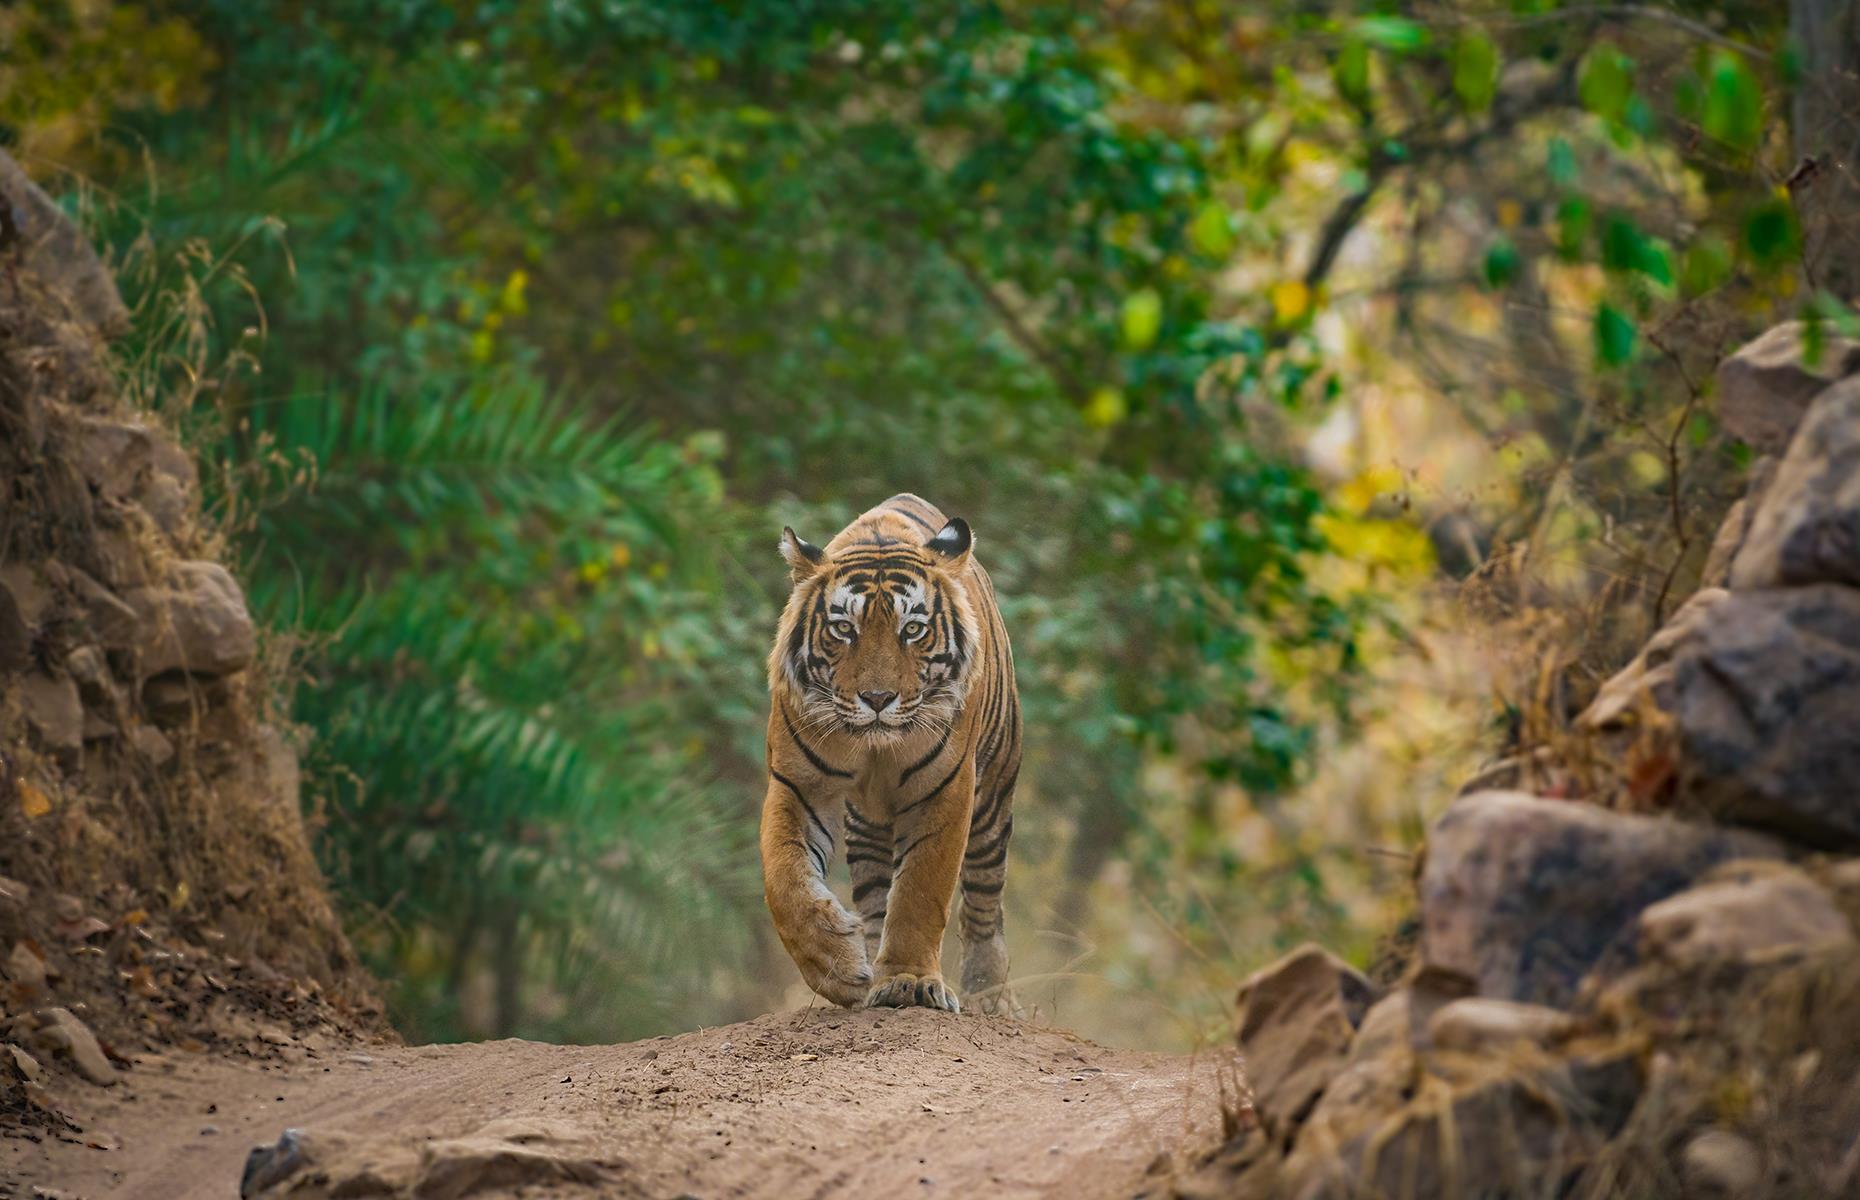 Stray away from the big hits of the Golden Triangle – connecting Delhi, Agra, Jaipur, the most visited cities in India’s northwest – and strike real gold. Ranthambore National Park comprises vast swathes of jungle scrub, centered on the 10th-century Ranthambore Fort. It’s known as one of the best places to spot wild tigers in Rajasthan – long may that continue.